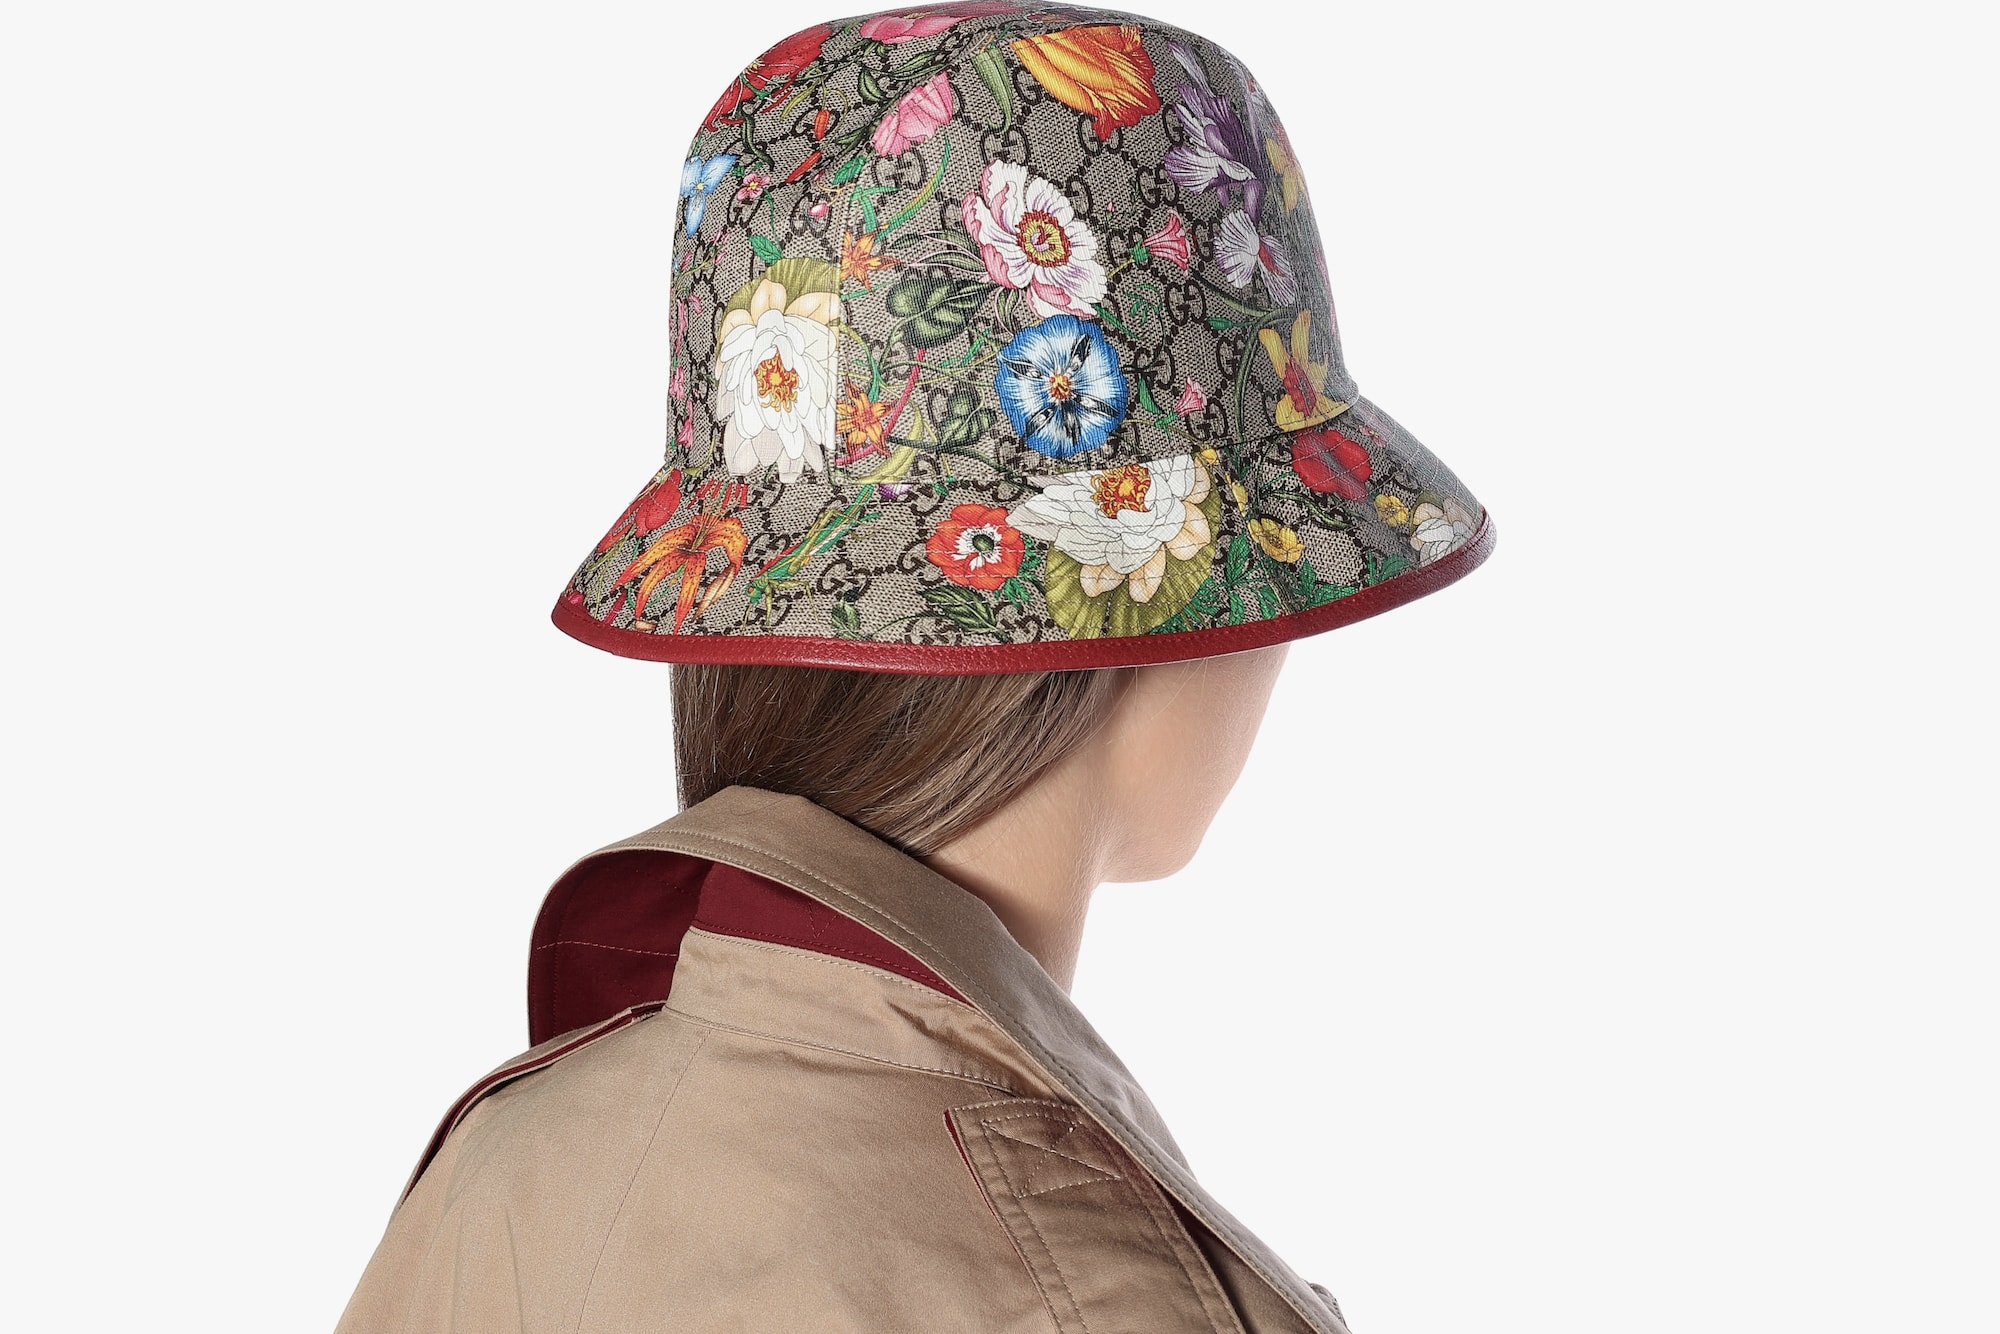 Gucci Logo Monogram Floral Print Hat Accessory Flowers Graphic Colorful 